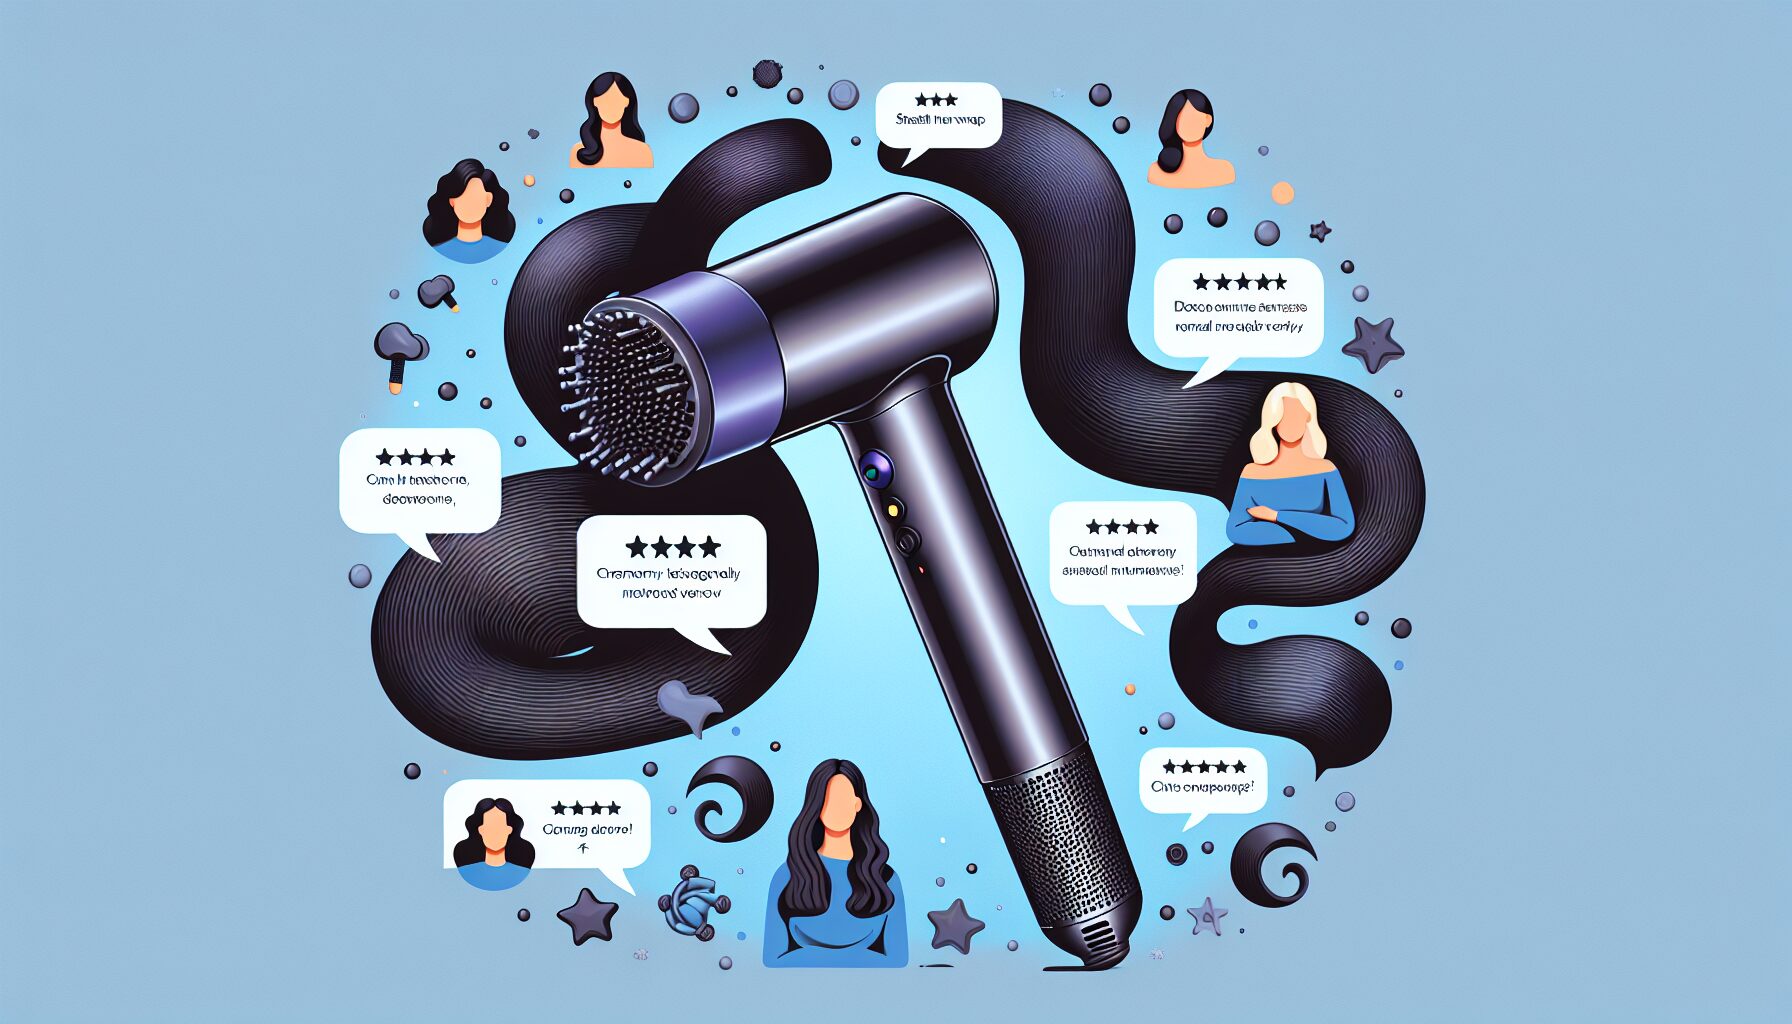 Why Does Everyone Love Dyson Airwrap?